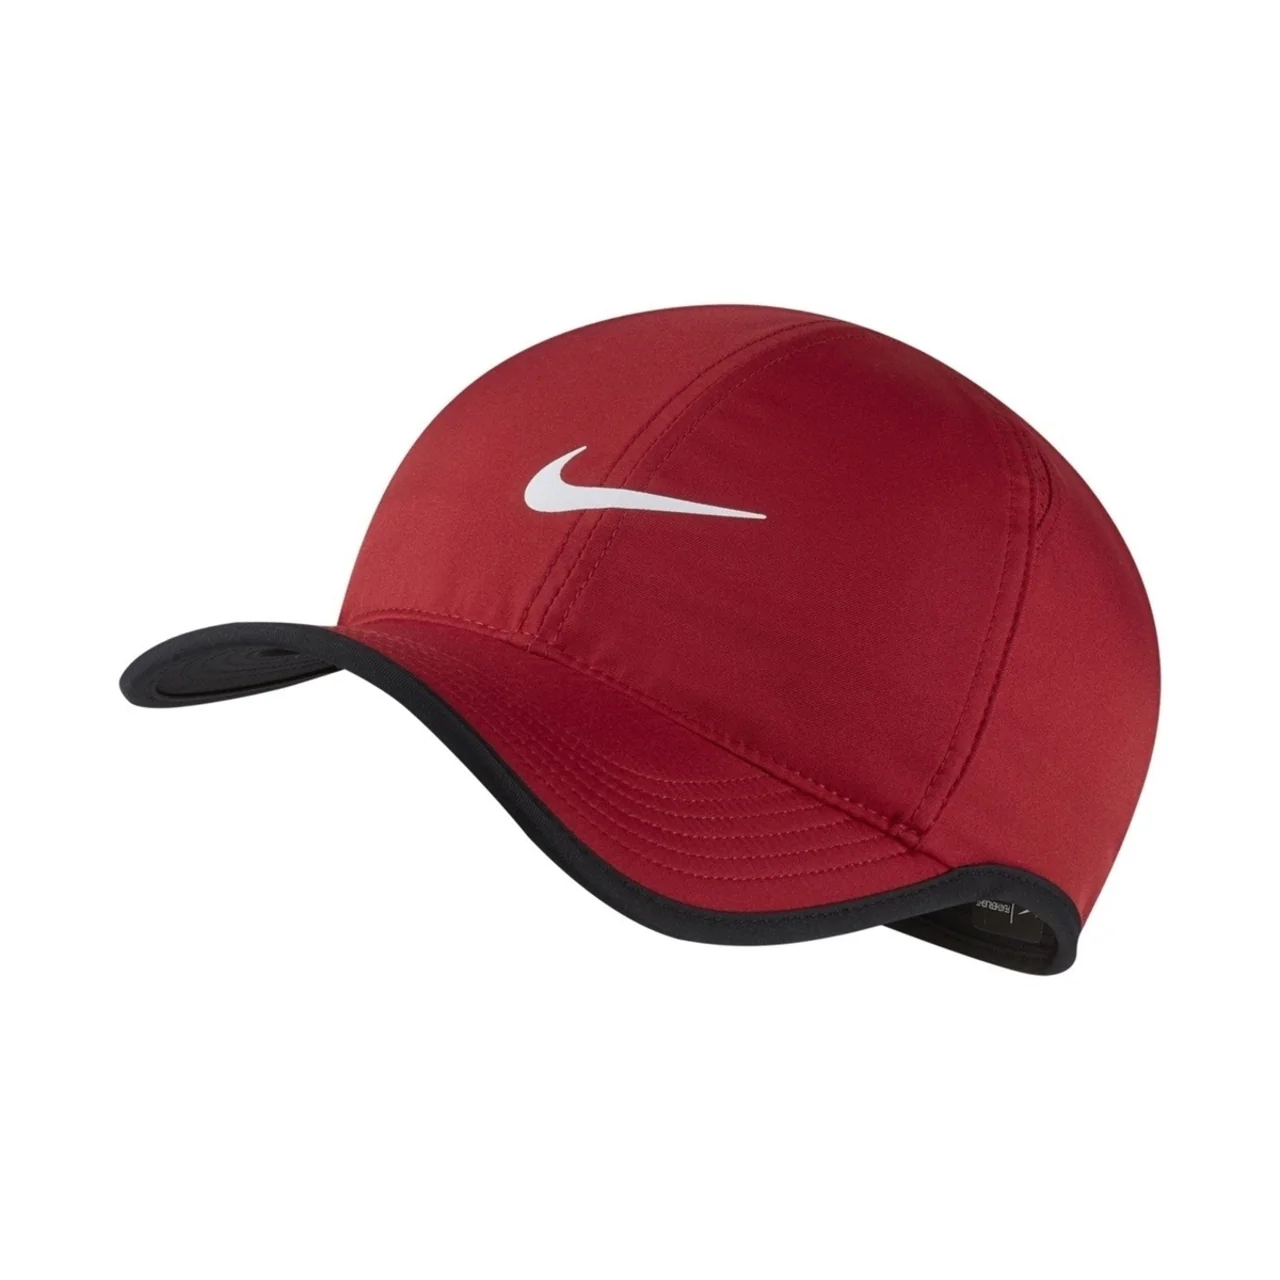 Nike Feather Light Cap Red